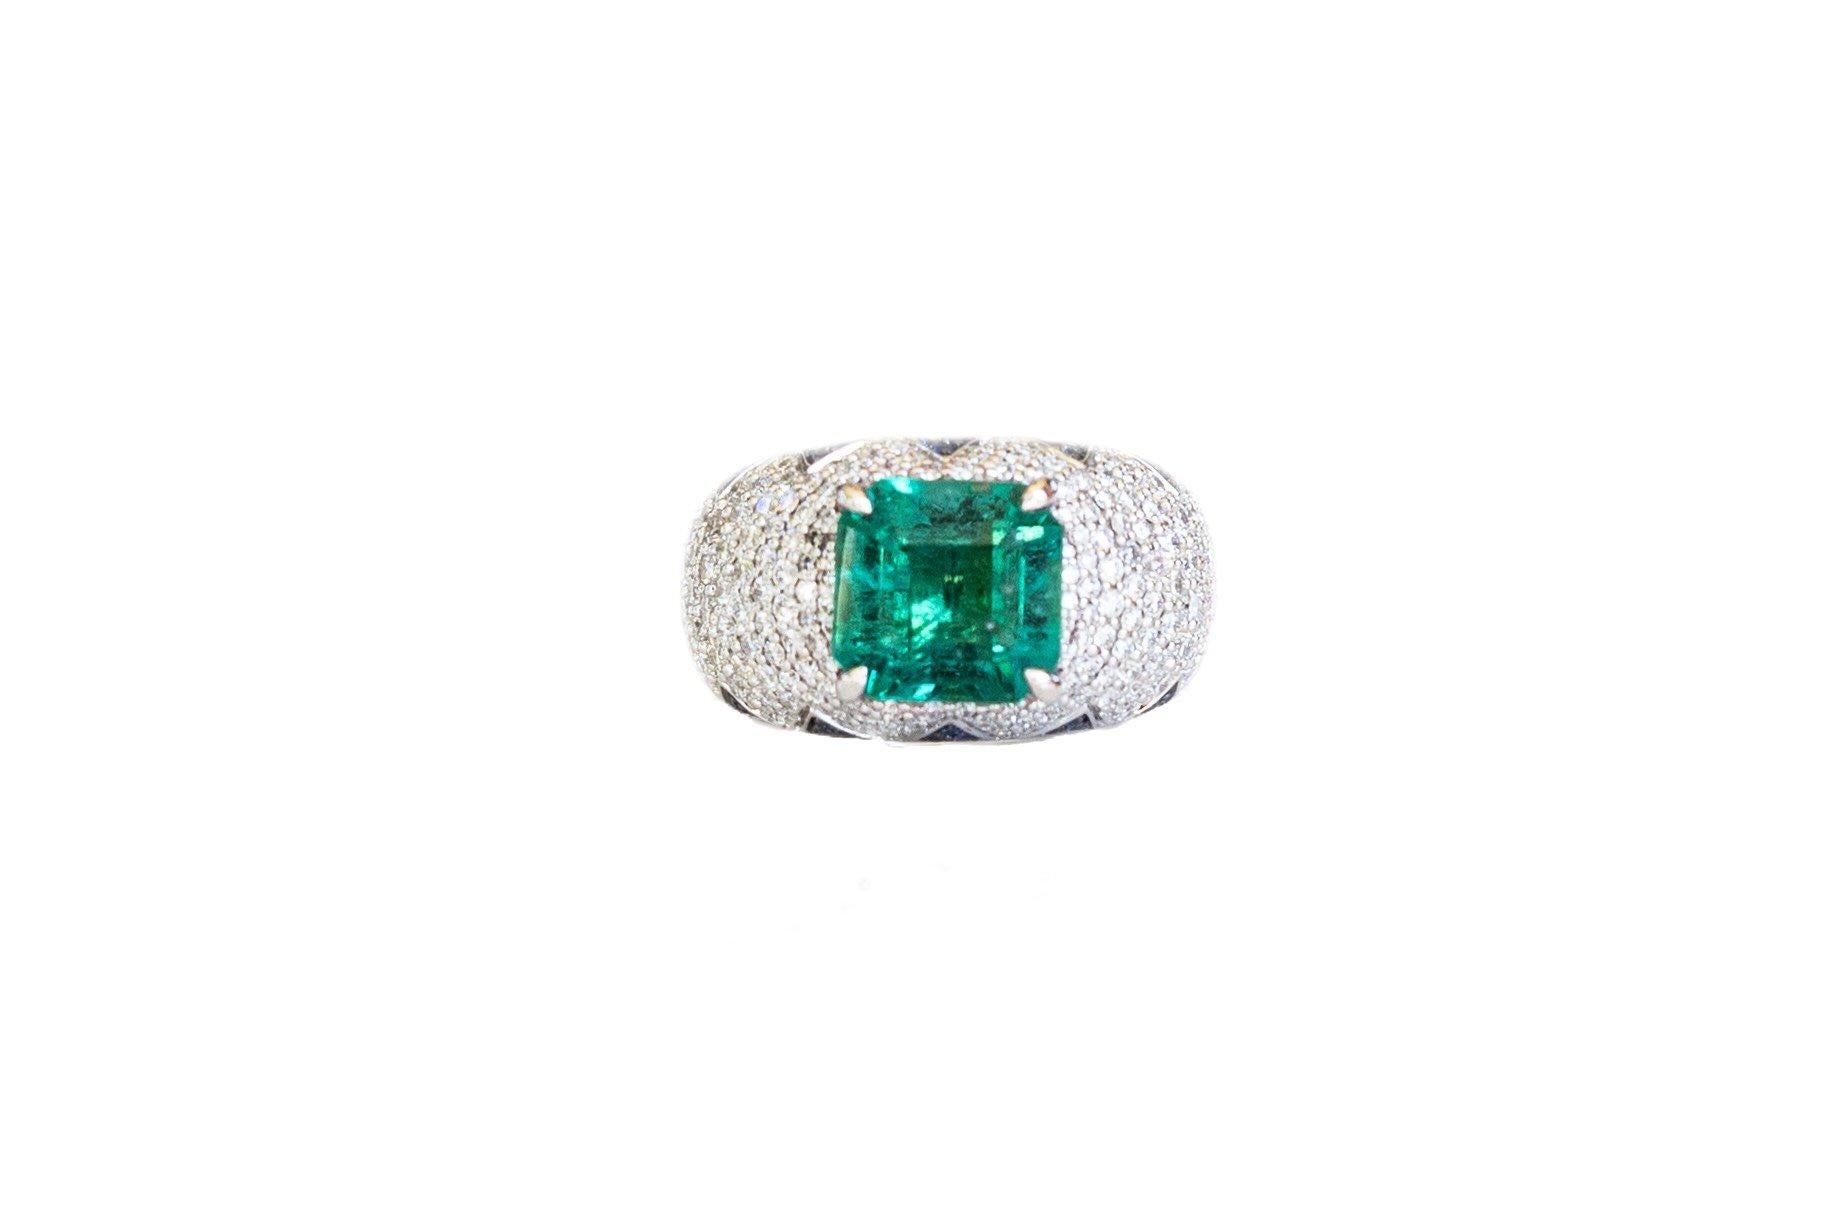 8k White Gold. These any-finger rings include a dazzling square emerald solitaire of approximately 3.75 cts, pave set blue sapphire petals in a lotus motif and pave set brilliant cut white diamonds. Rinoor's re-imagined rings, are incredibly